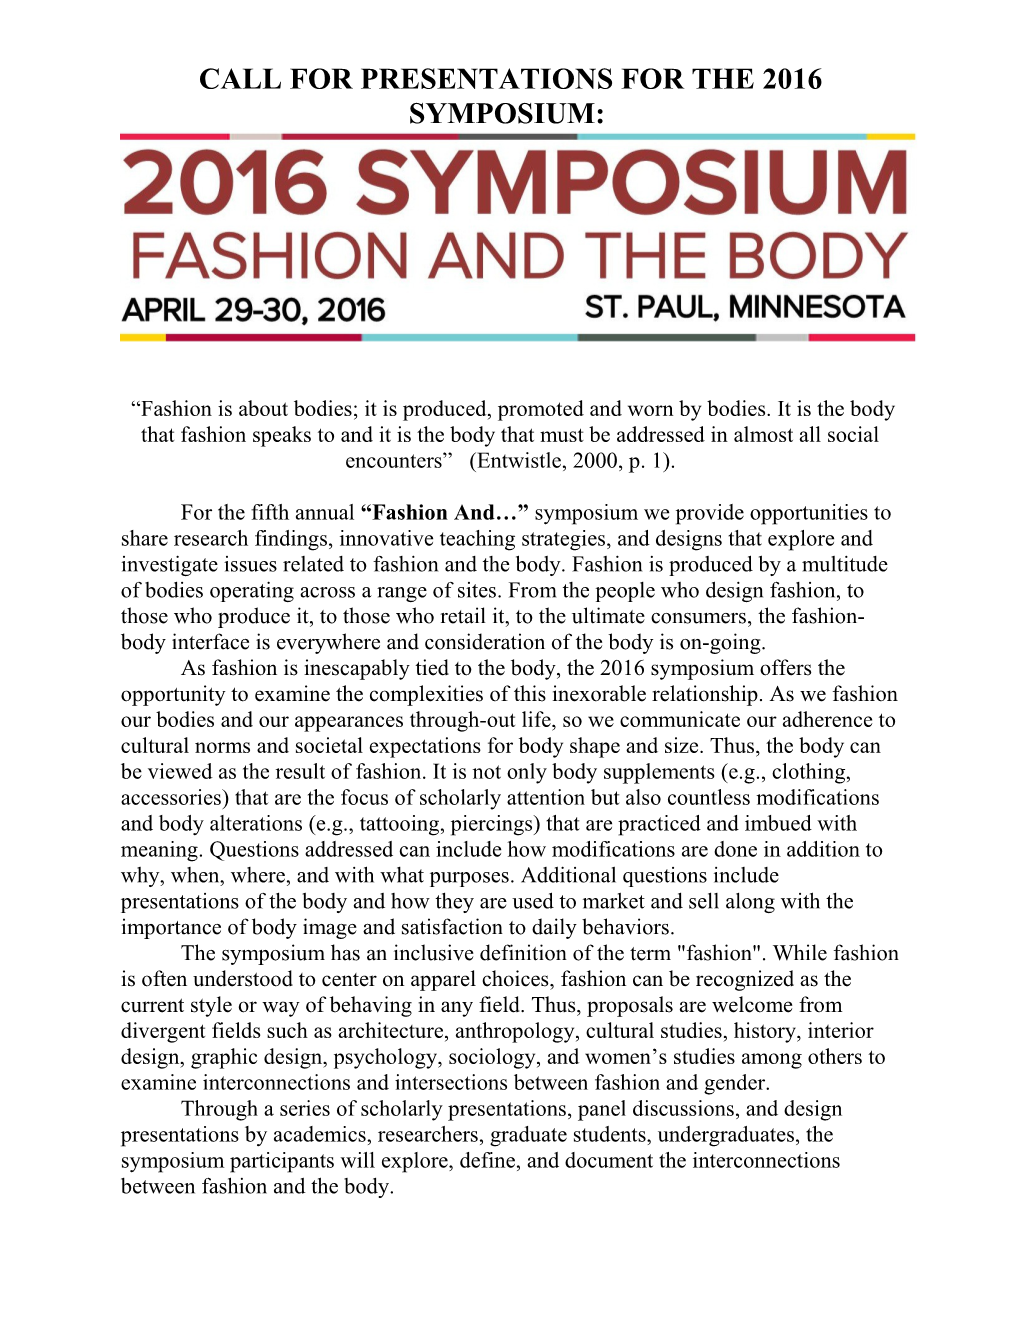 Call for Presentations for the 2016 Symposium